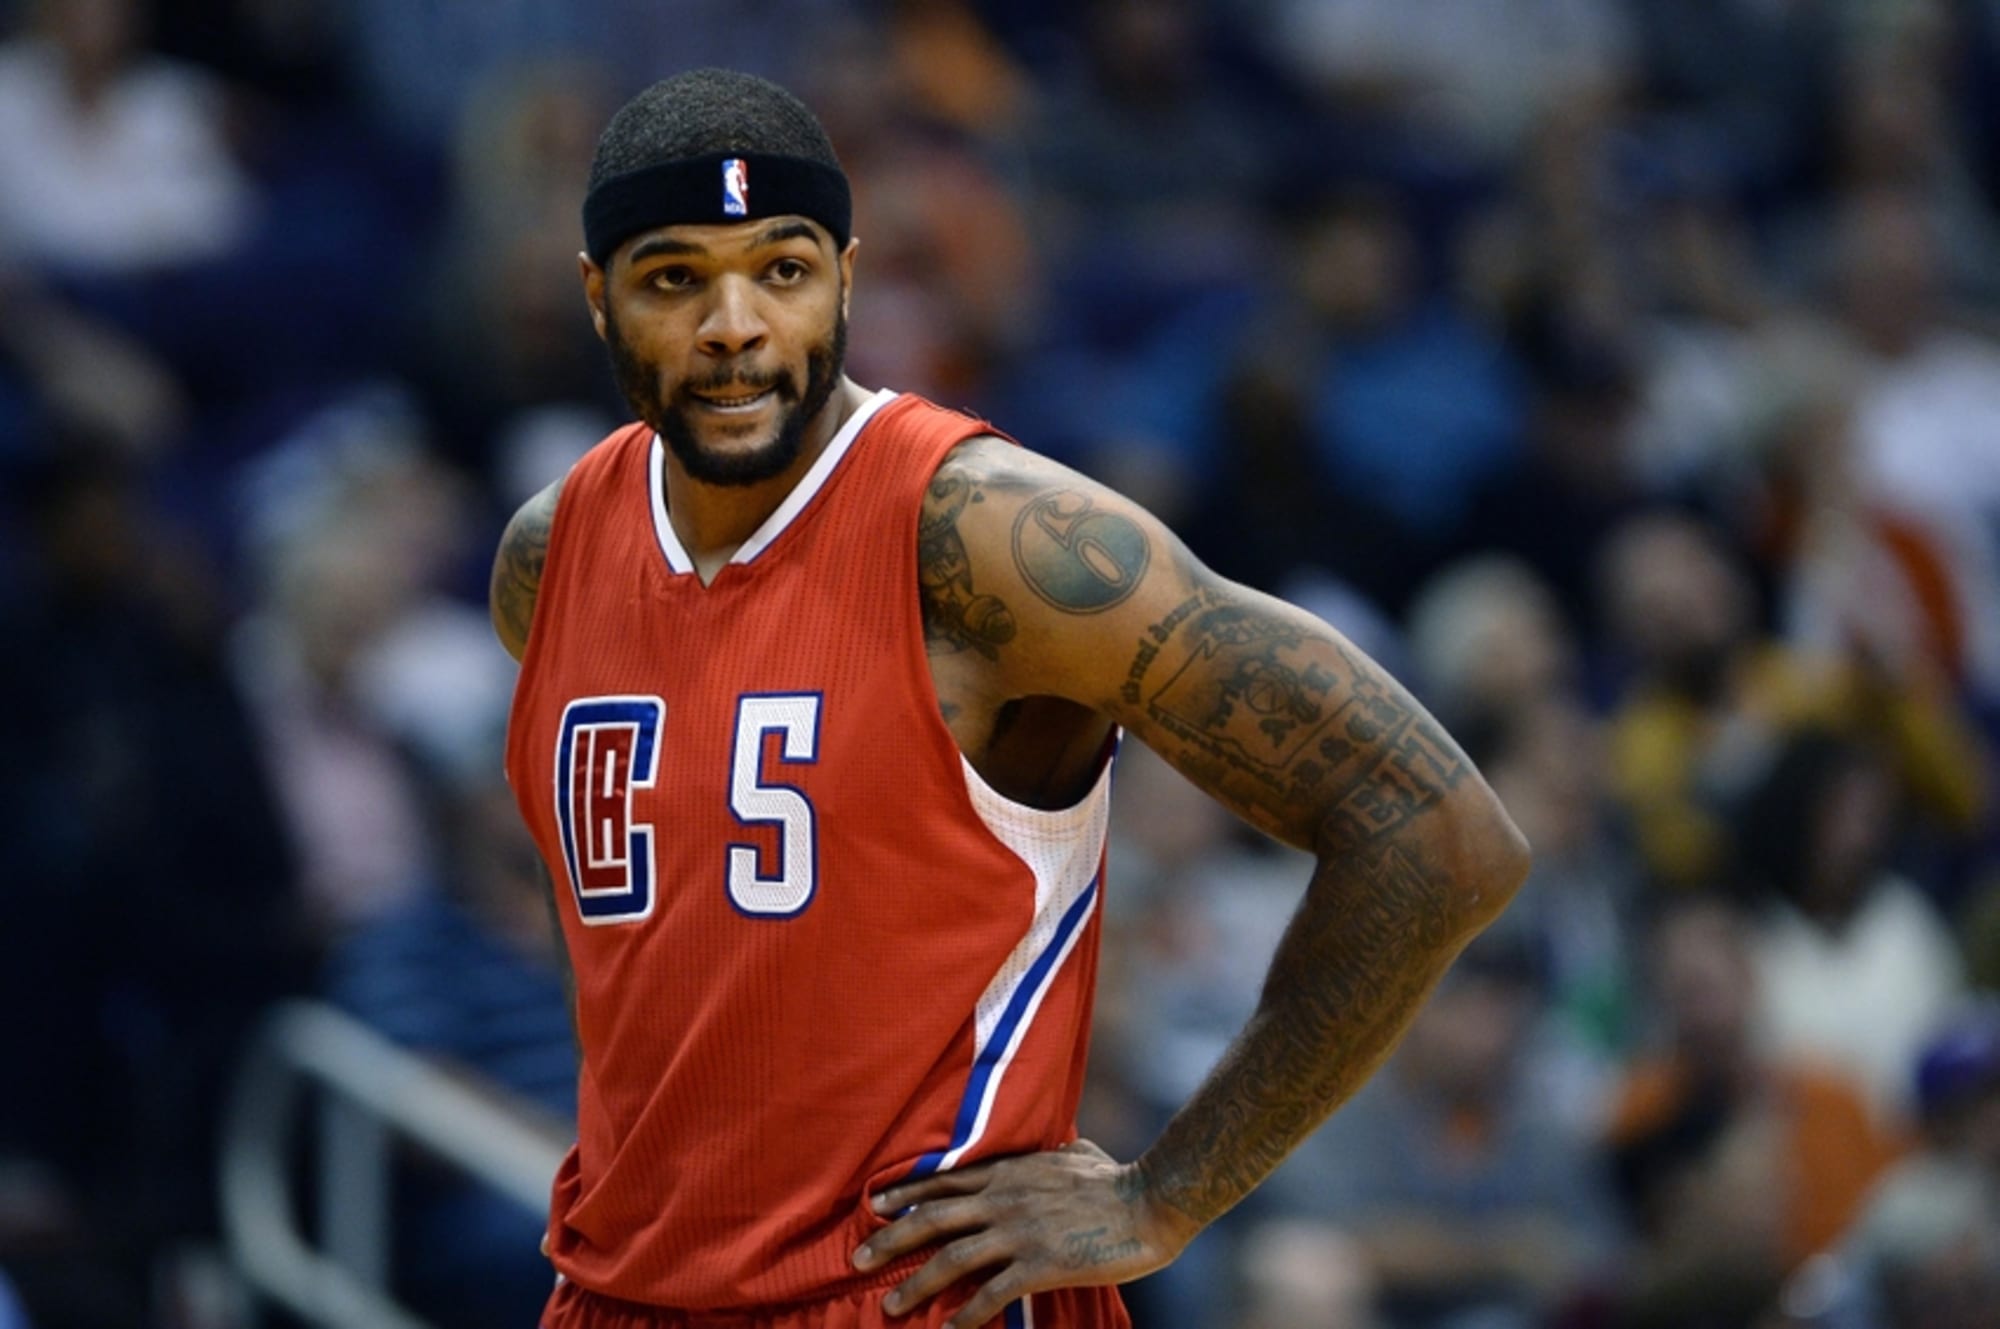 Josh Smith talks about getting hit in the face with a pitch 